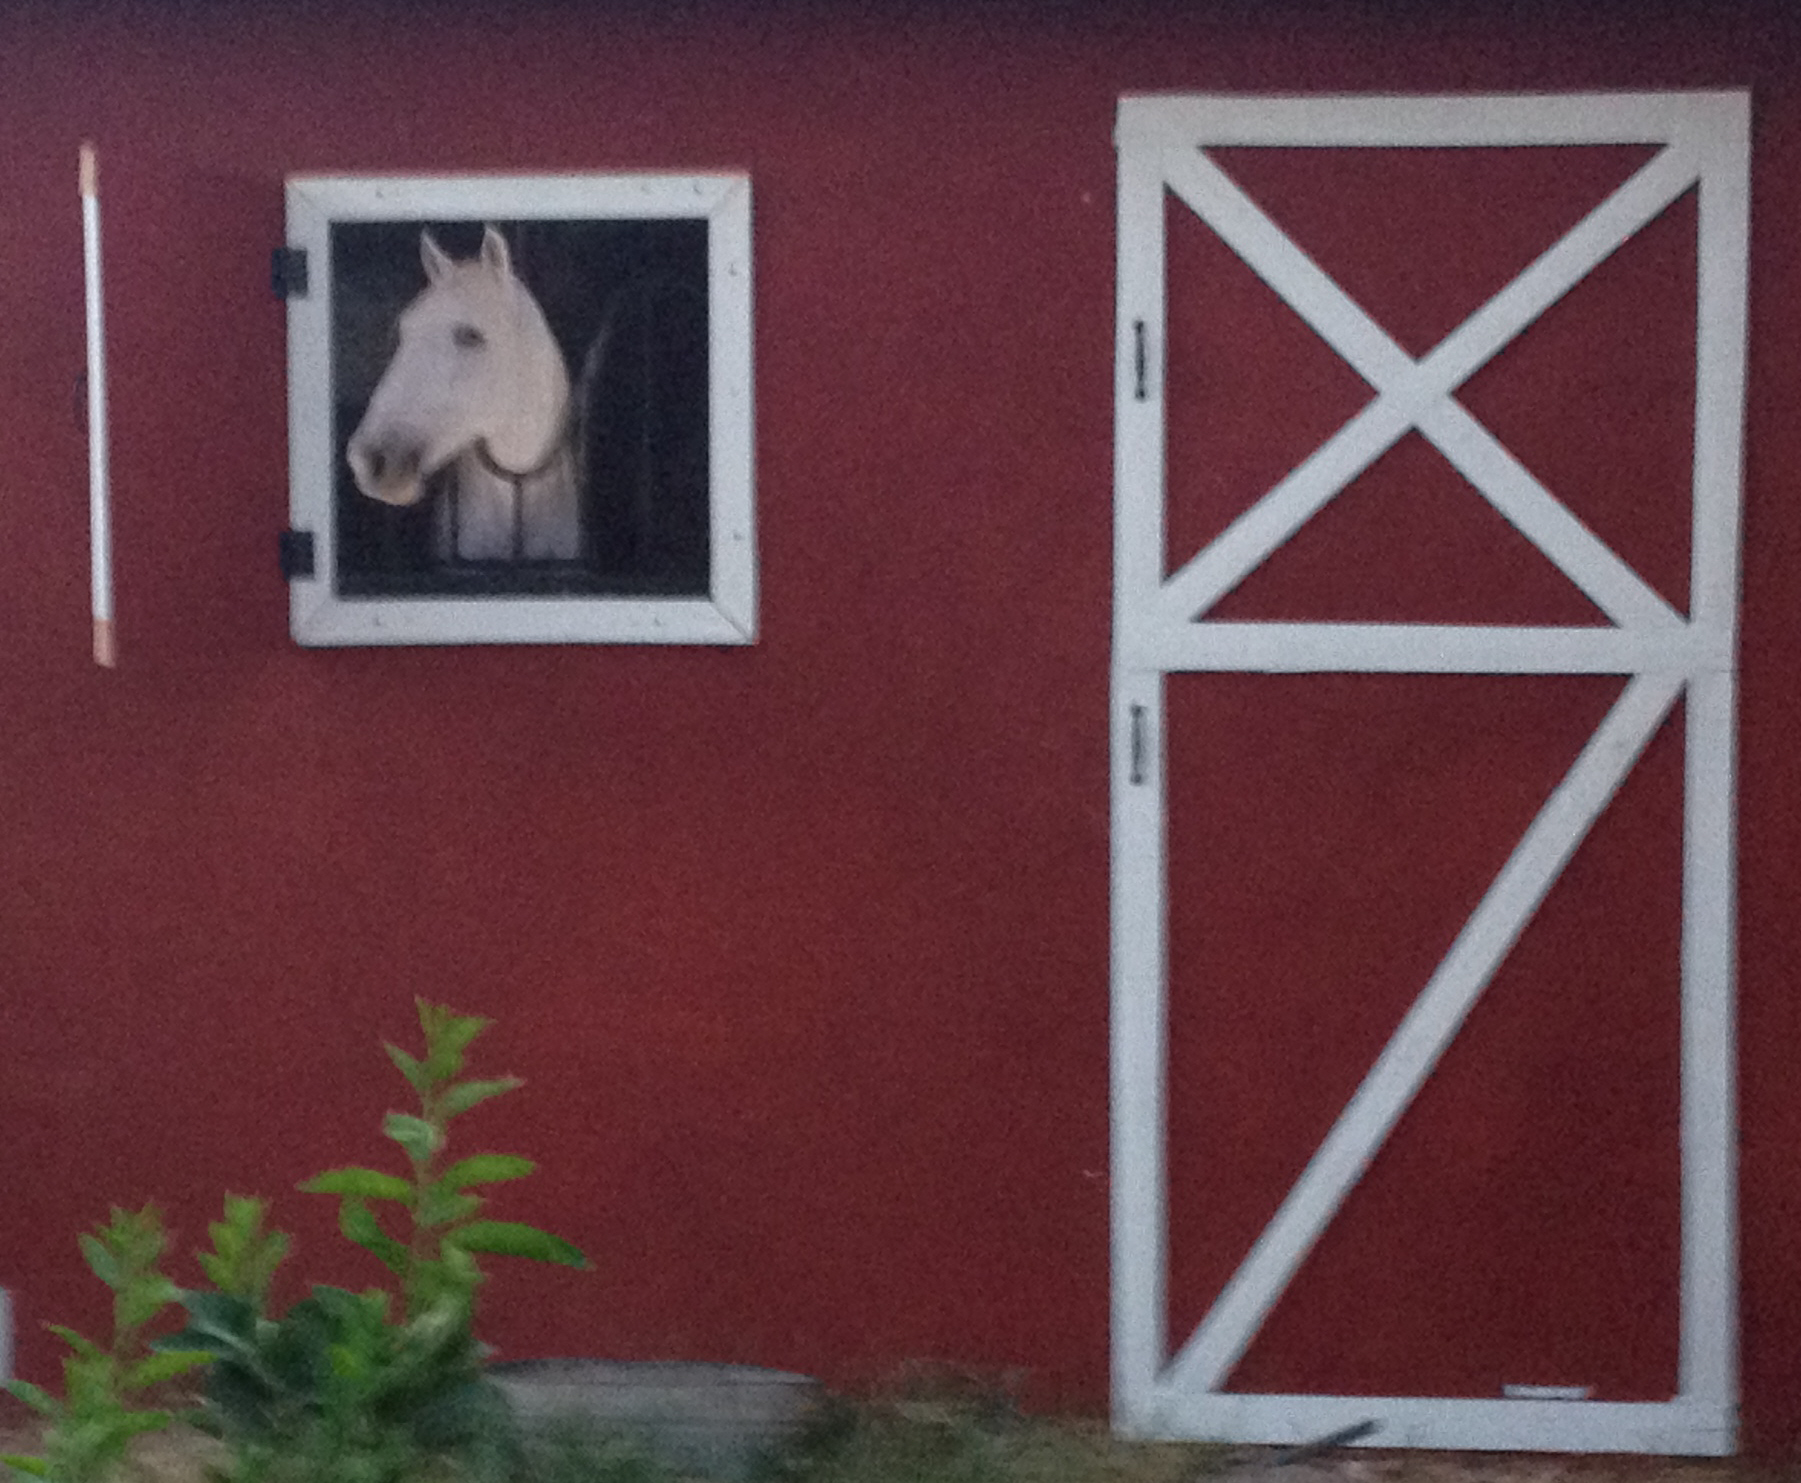 Horse Mural 2 made with sublimation printing